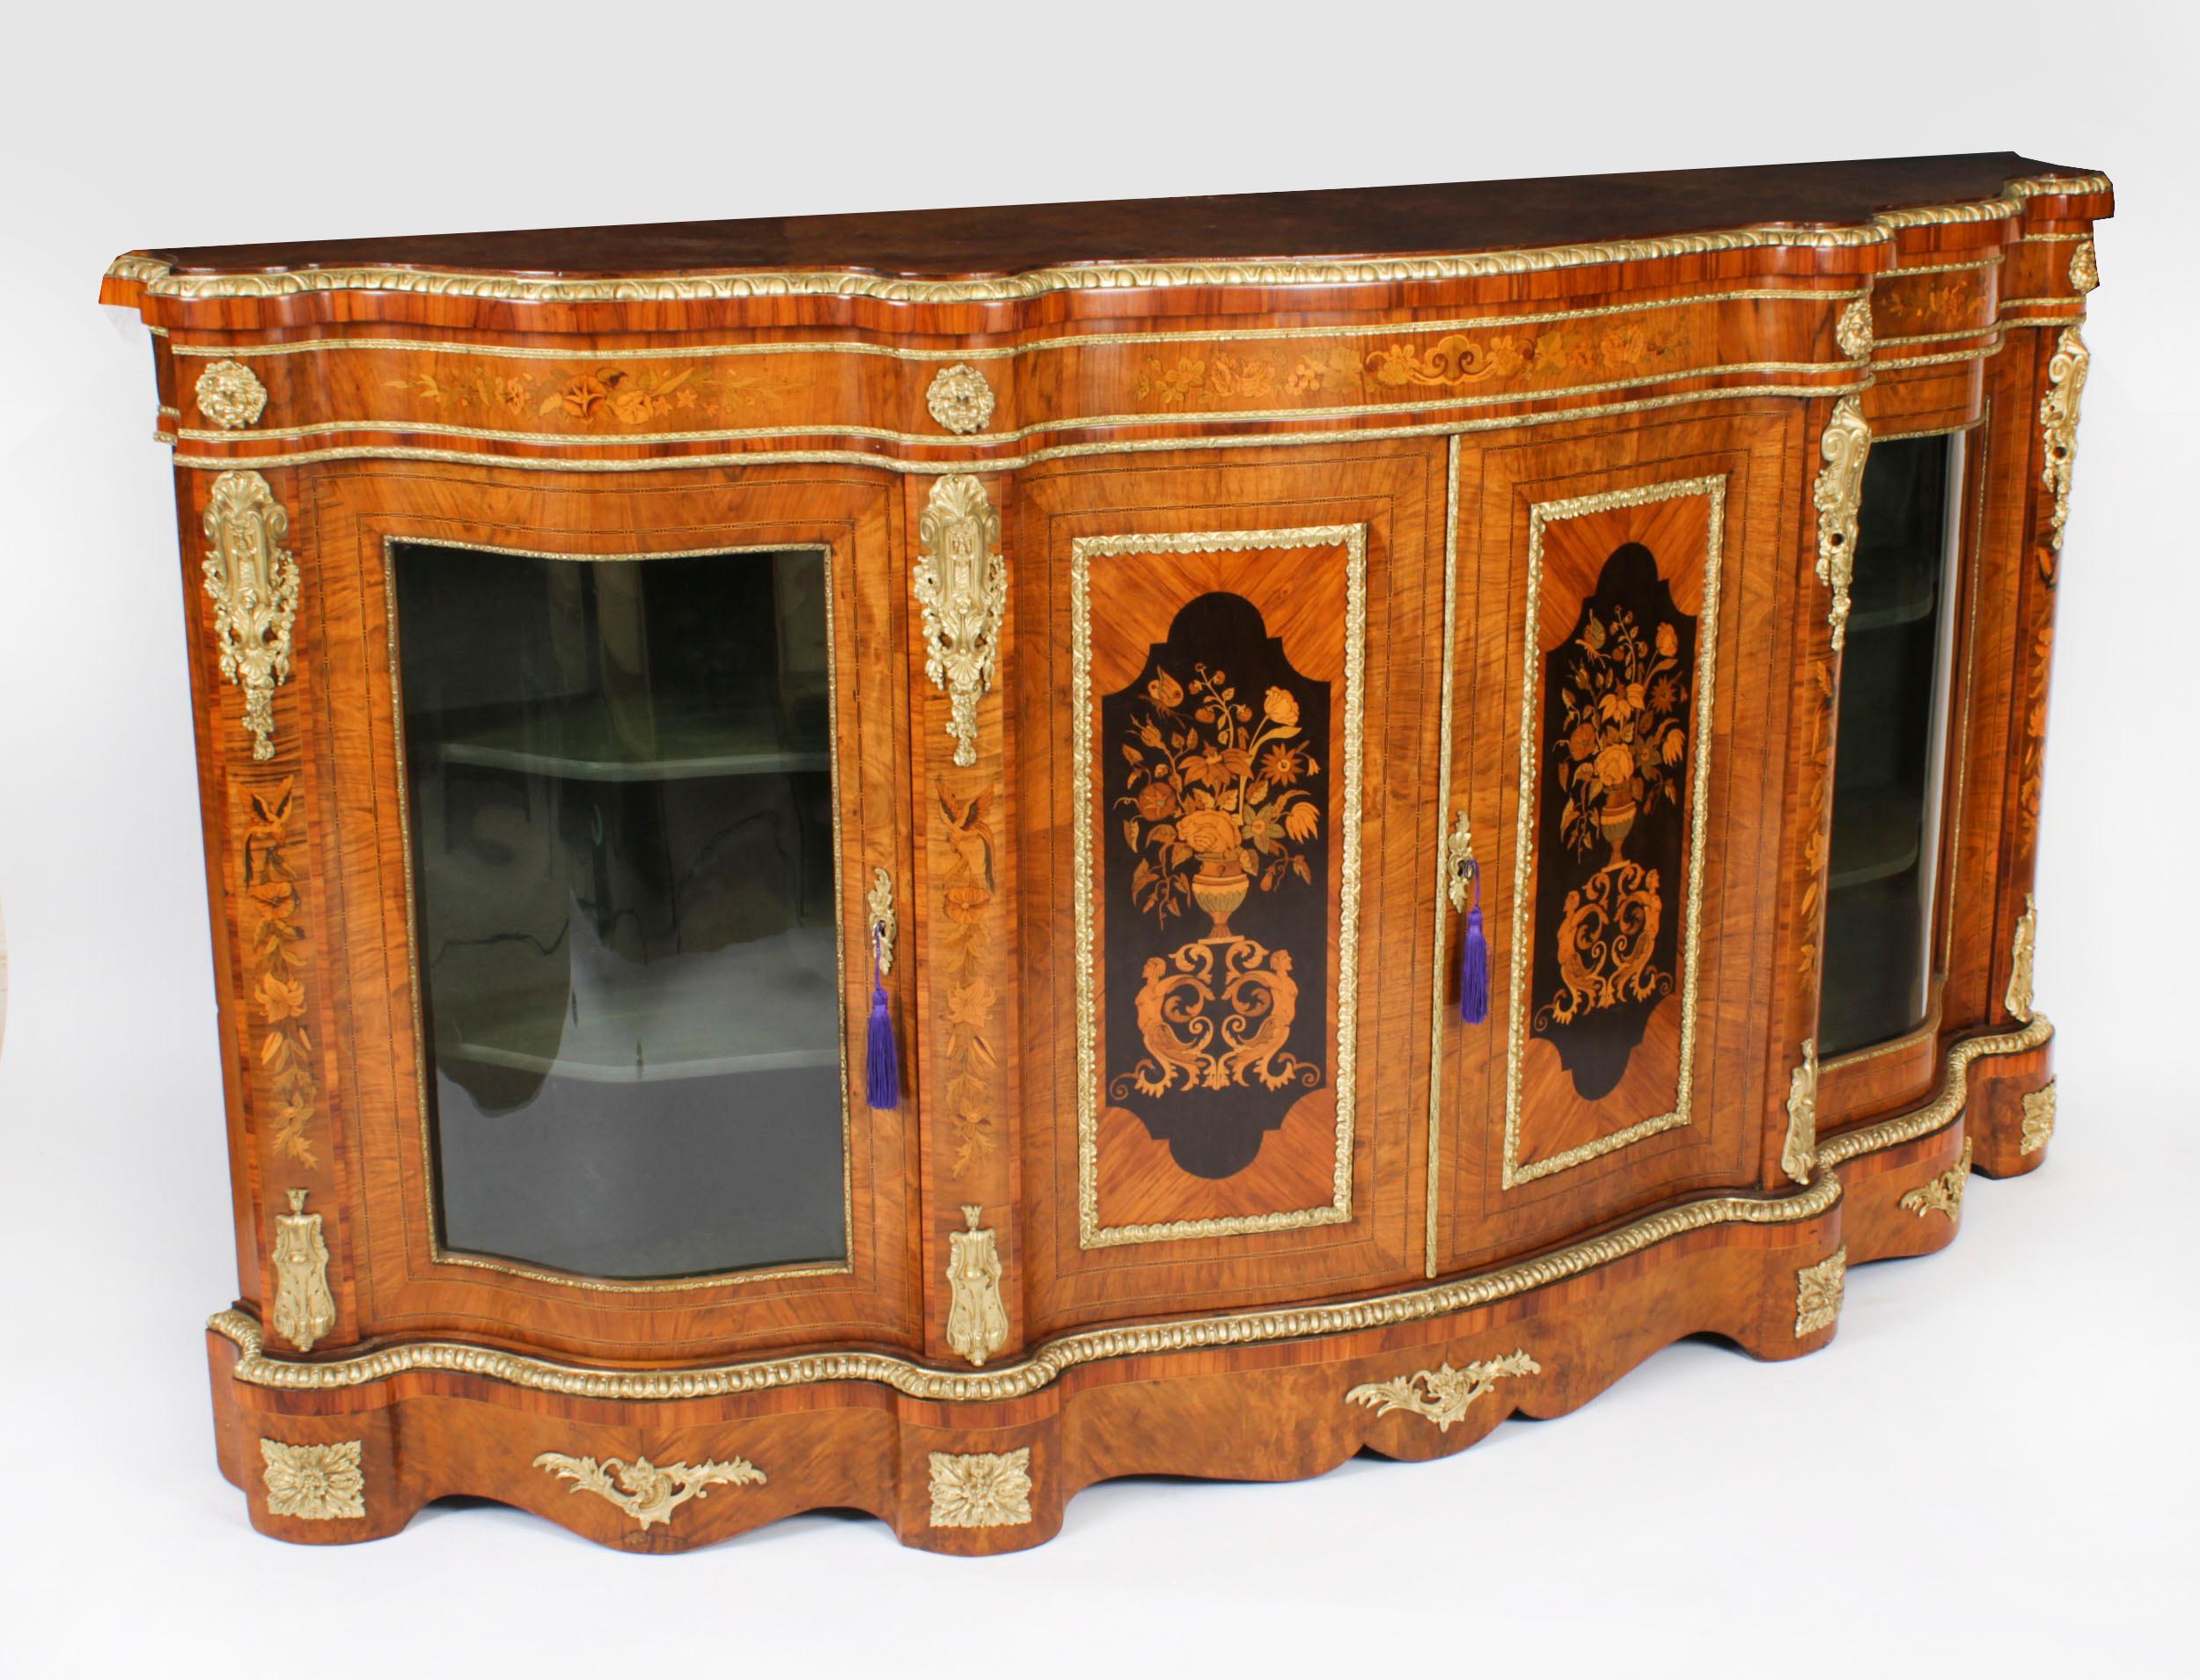 This is a superb antique Victorian ormolu mounted burr walnut floral marquetry inlaid credenza, circa 1860 in date.

The shaped top above a pair of panel doors inlaid with flowers and urns, flanked by glazed doors with shelf interior and raised on a